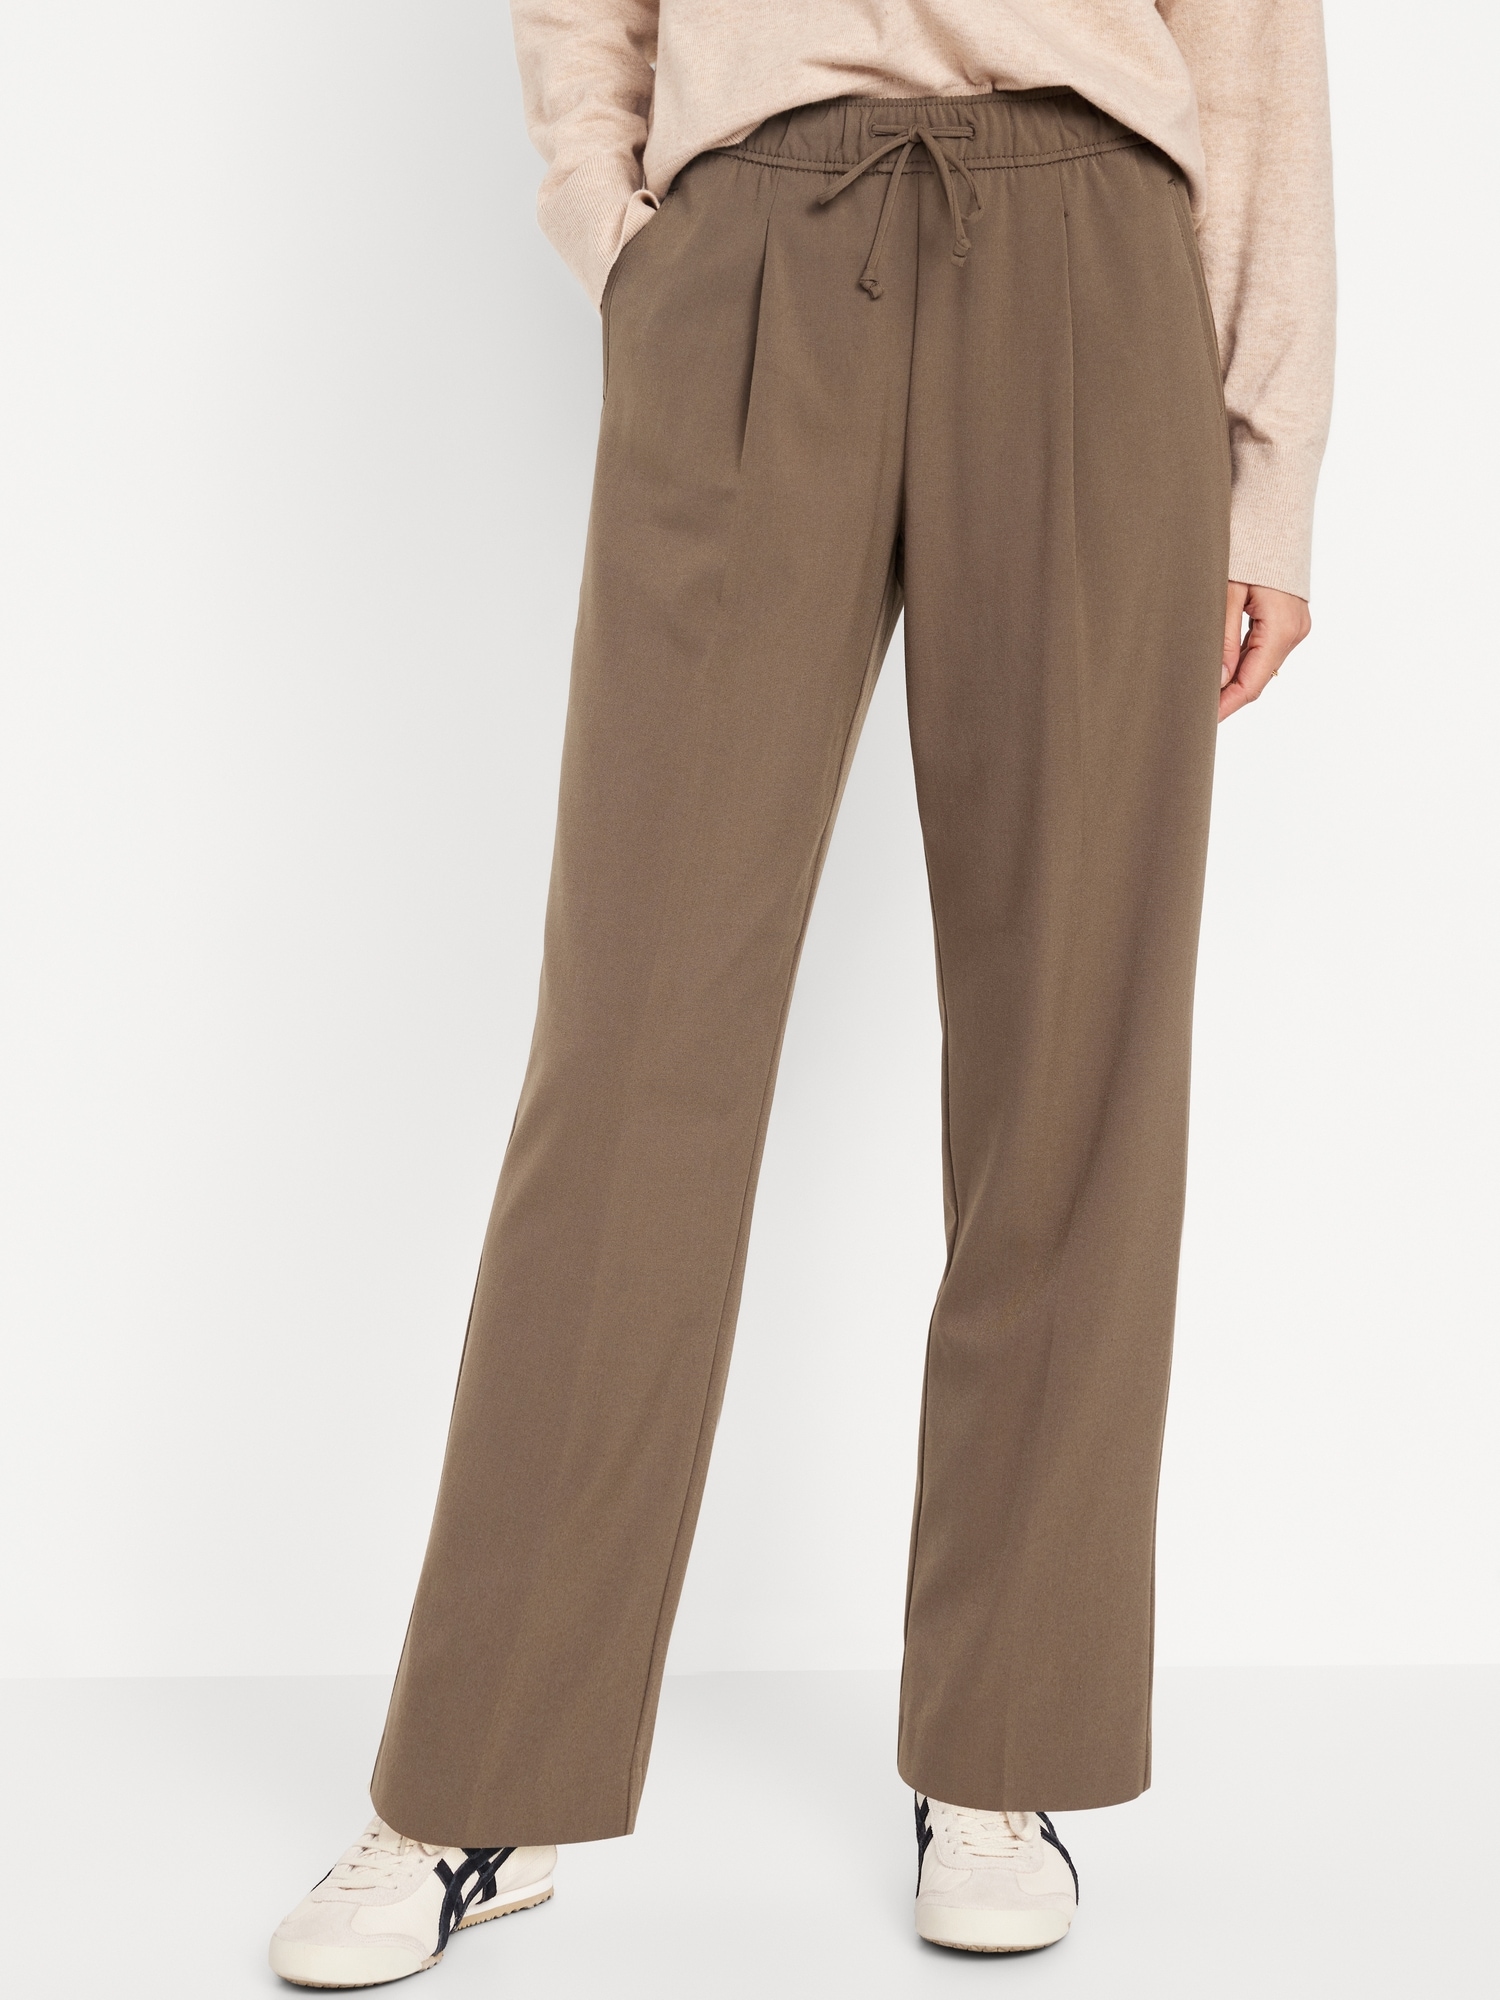 Trousers With Belt Loop - Grey Plain (Stretchable) | Zeve Shoes